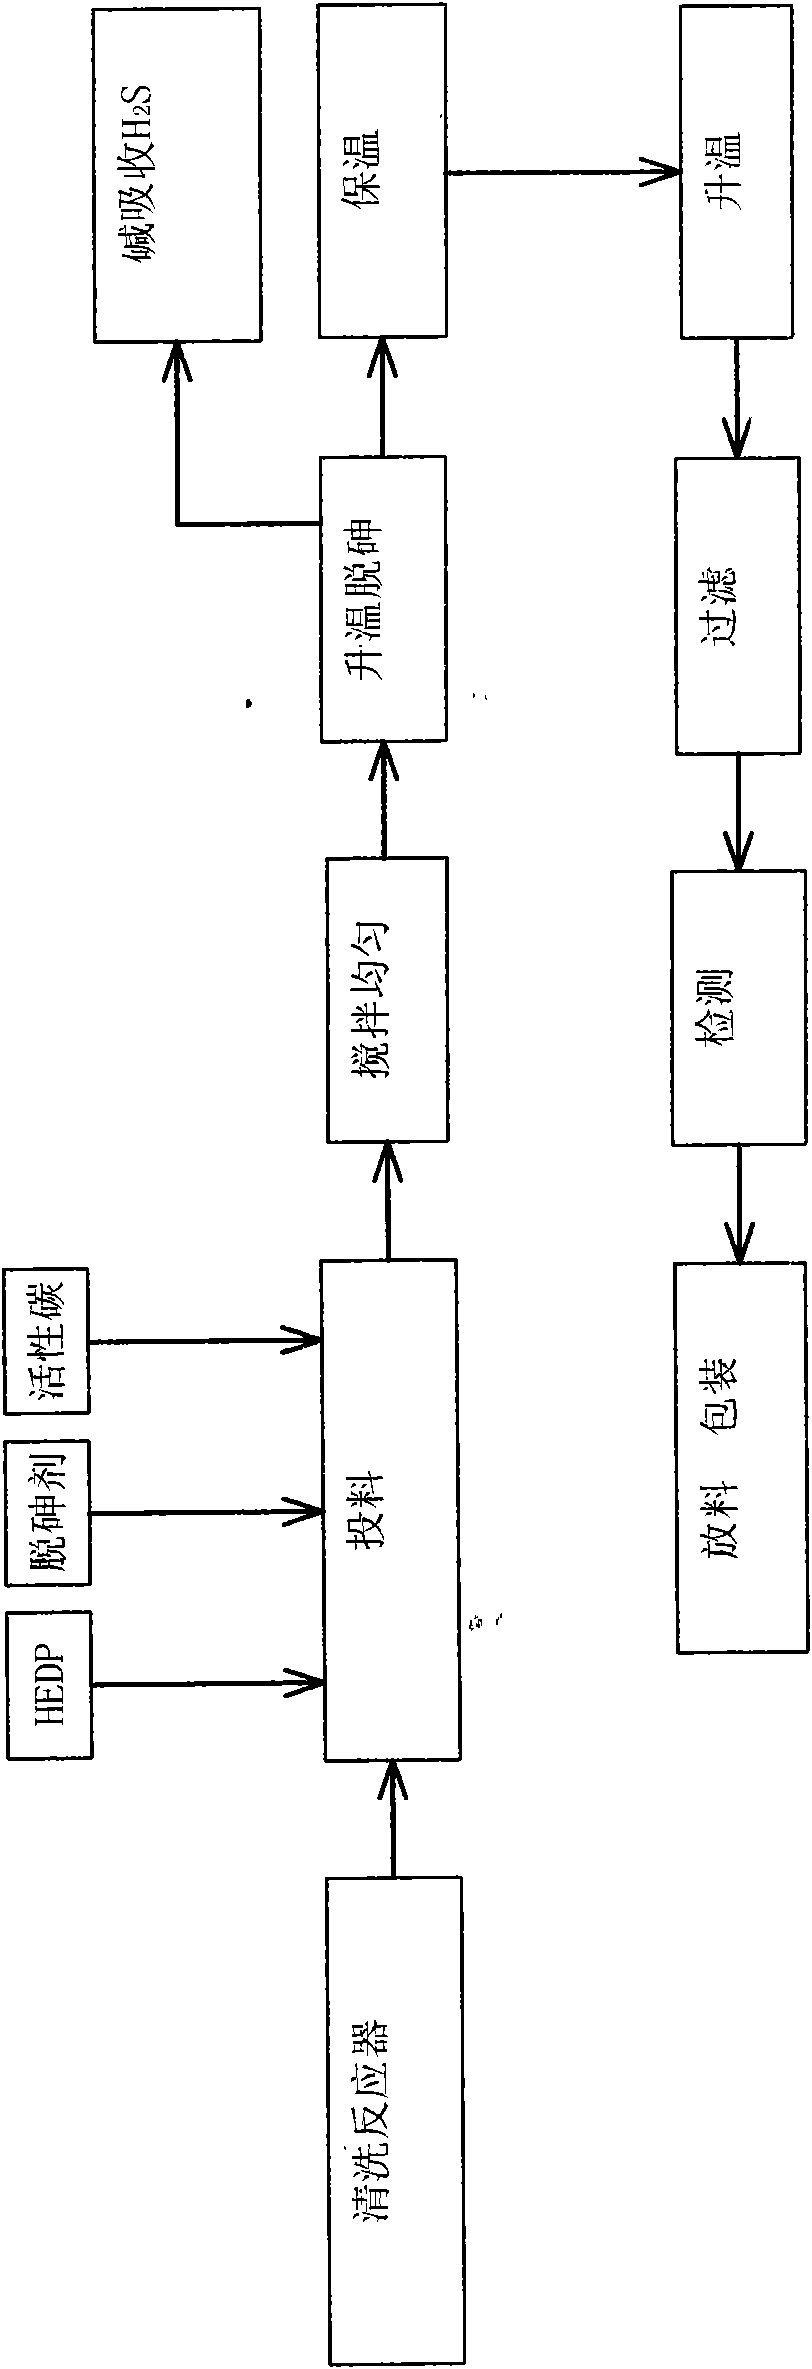 Process for arsenic removal of 1-hydroxy ethylidene-1,1-diphosphonic acid